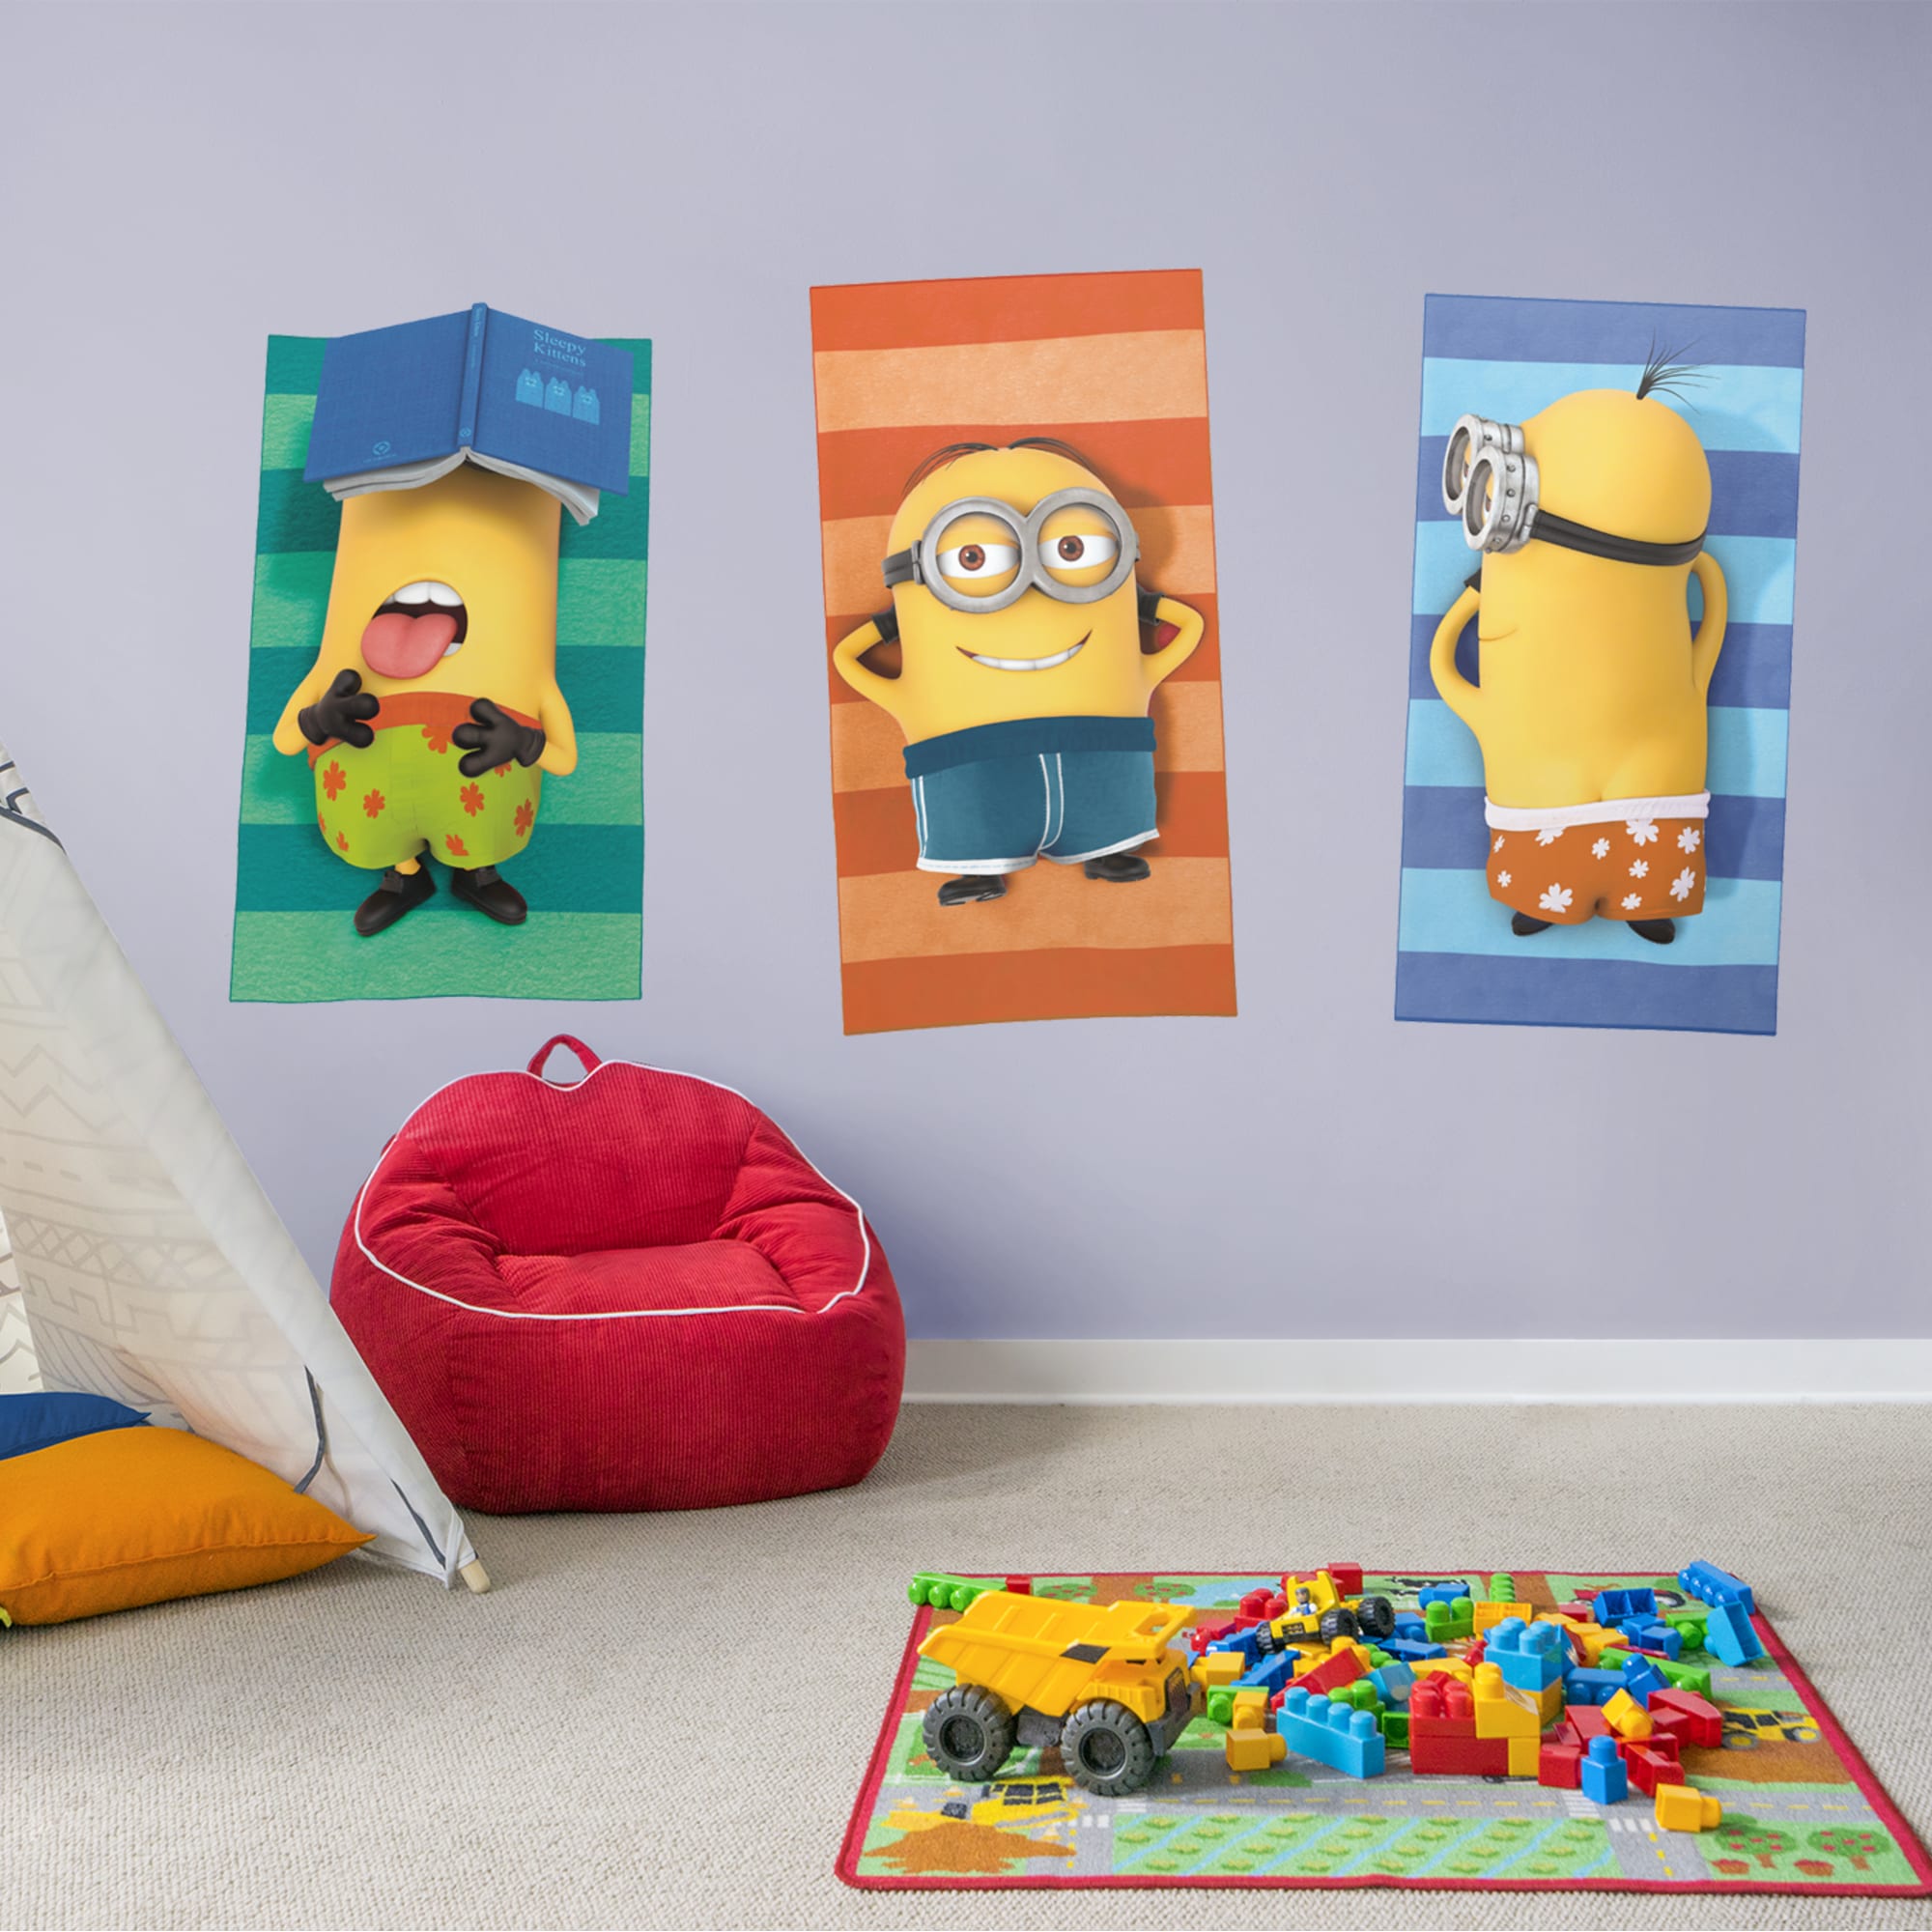 Minions: Sunbathing Collection - Officially Licensed Removable Wall Decal 80.0"W x 53.0"H by Fathead | Vinyl